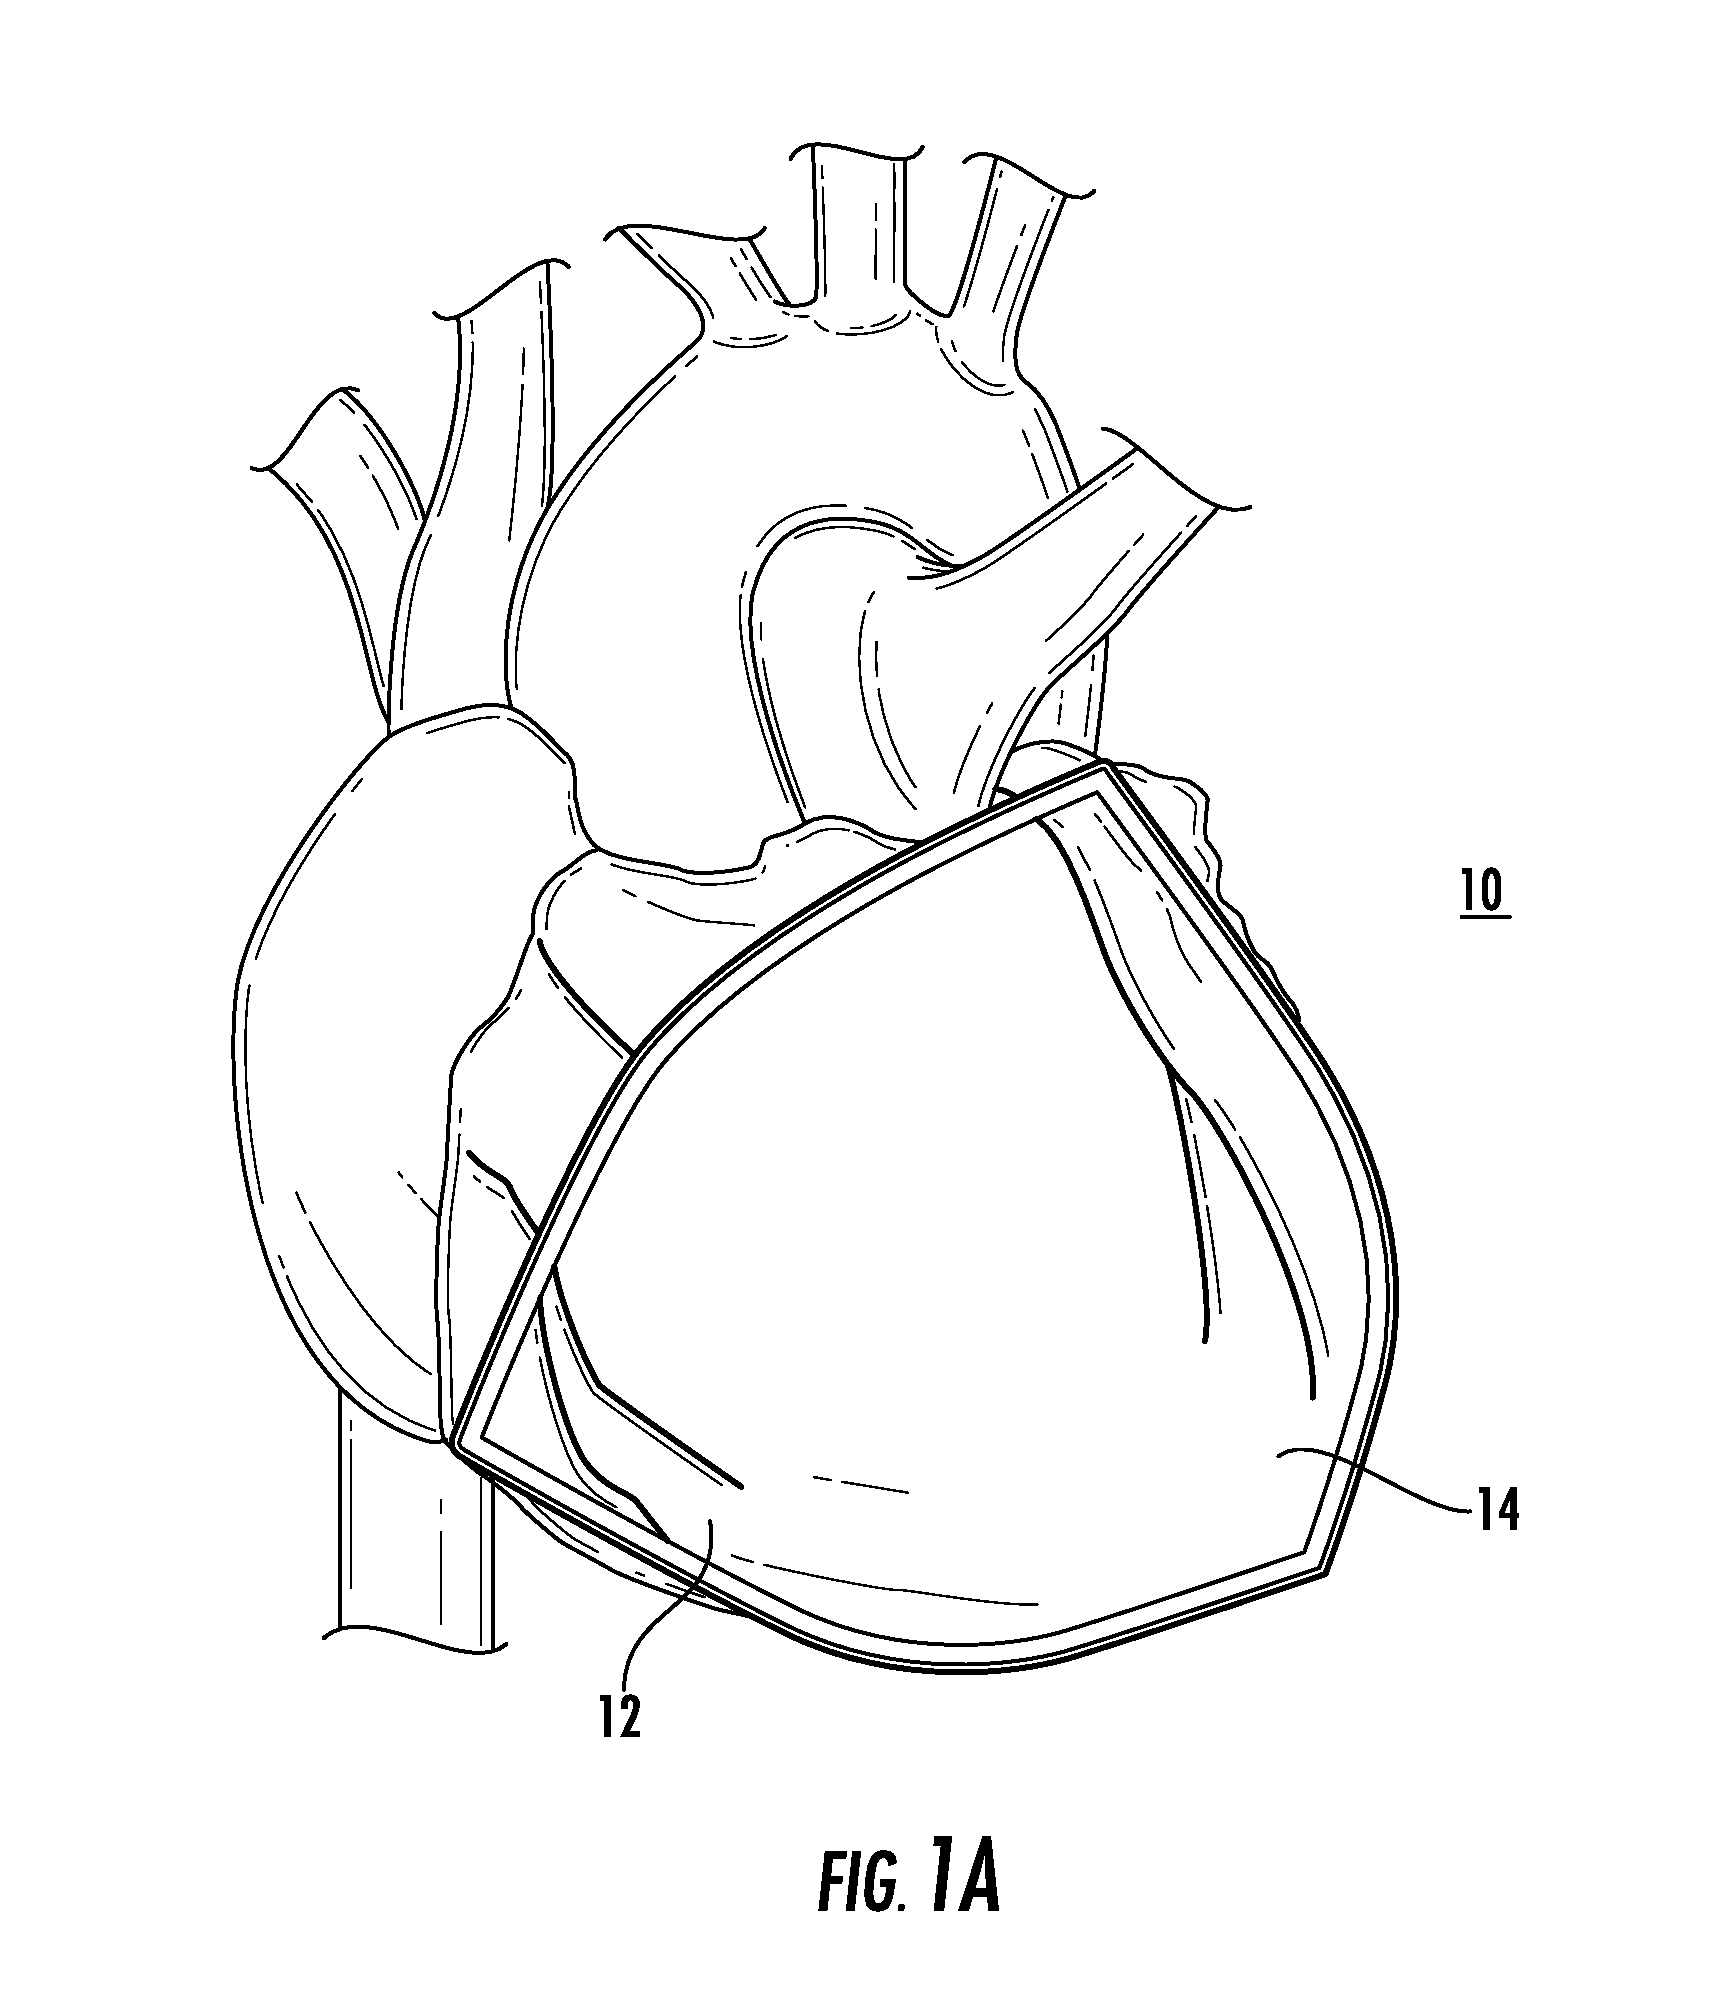 Bioactive implant for myocardial regeneration and ventricular chamber restoration